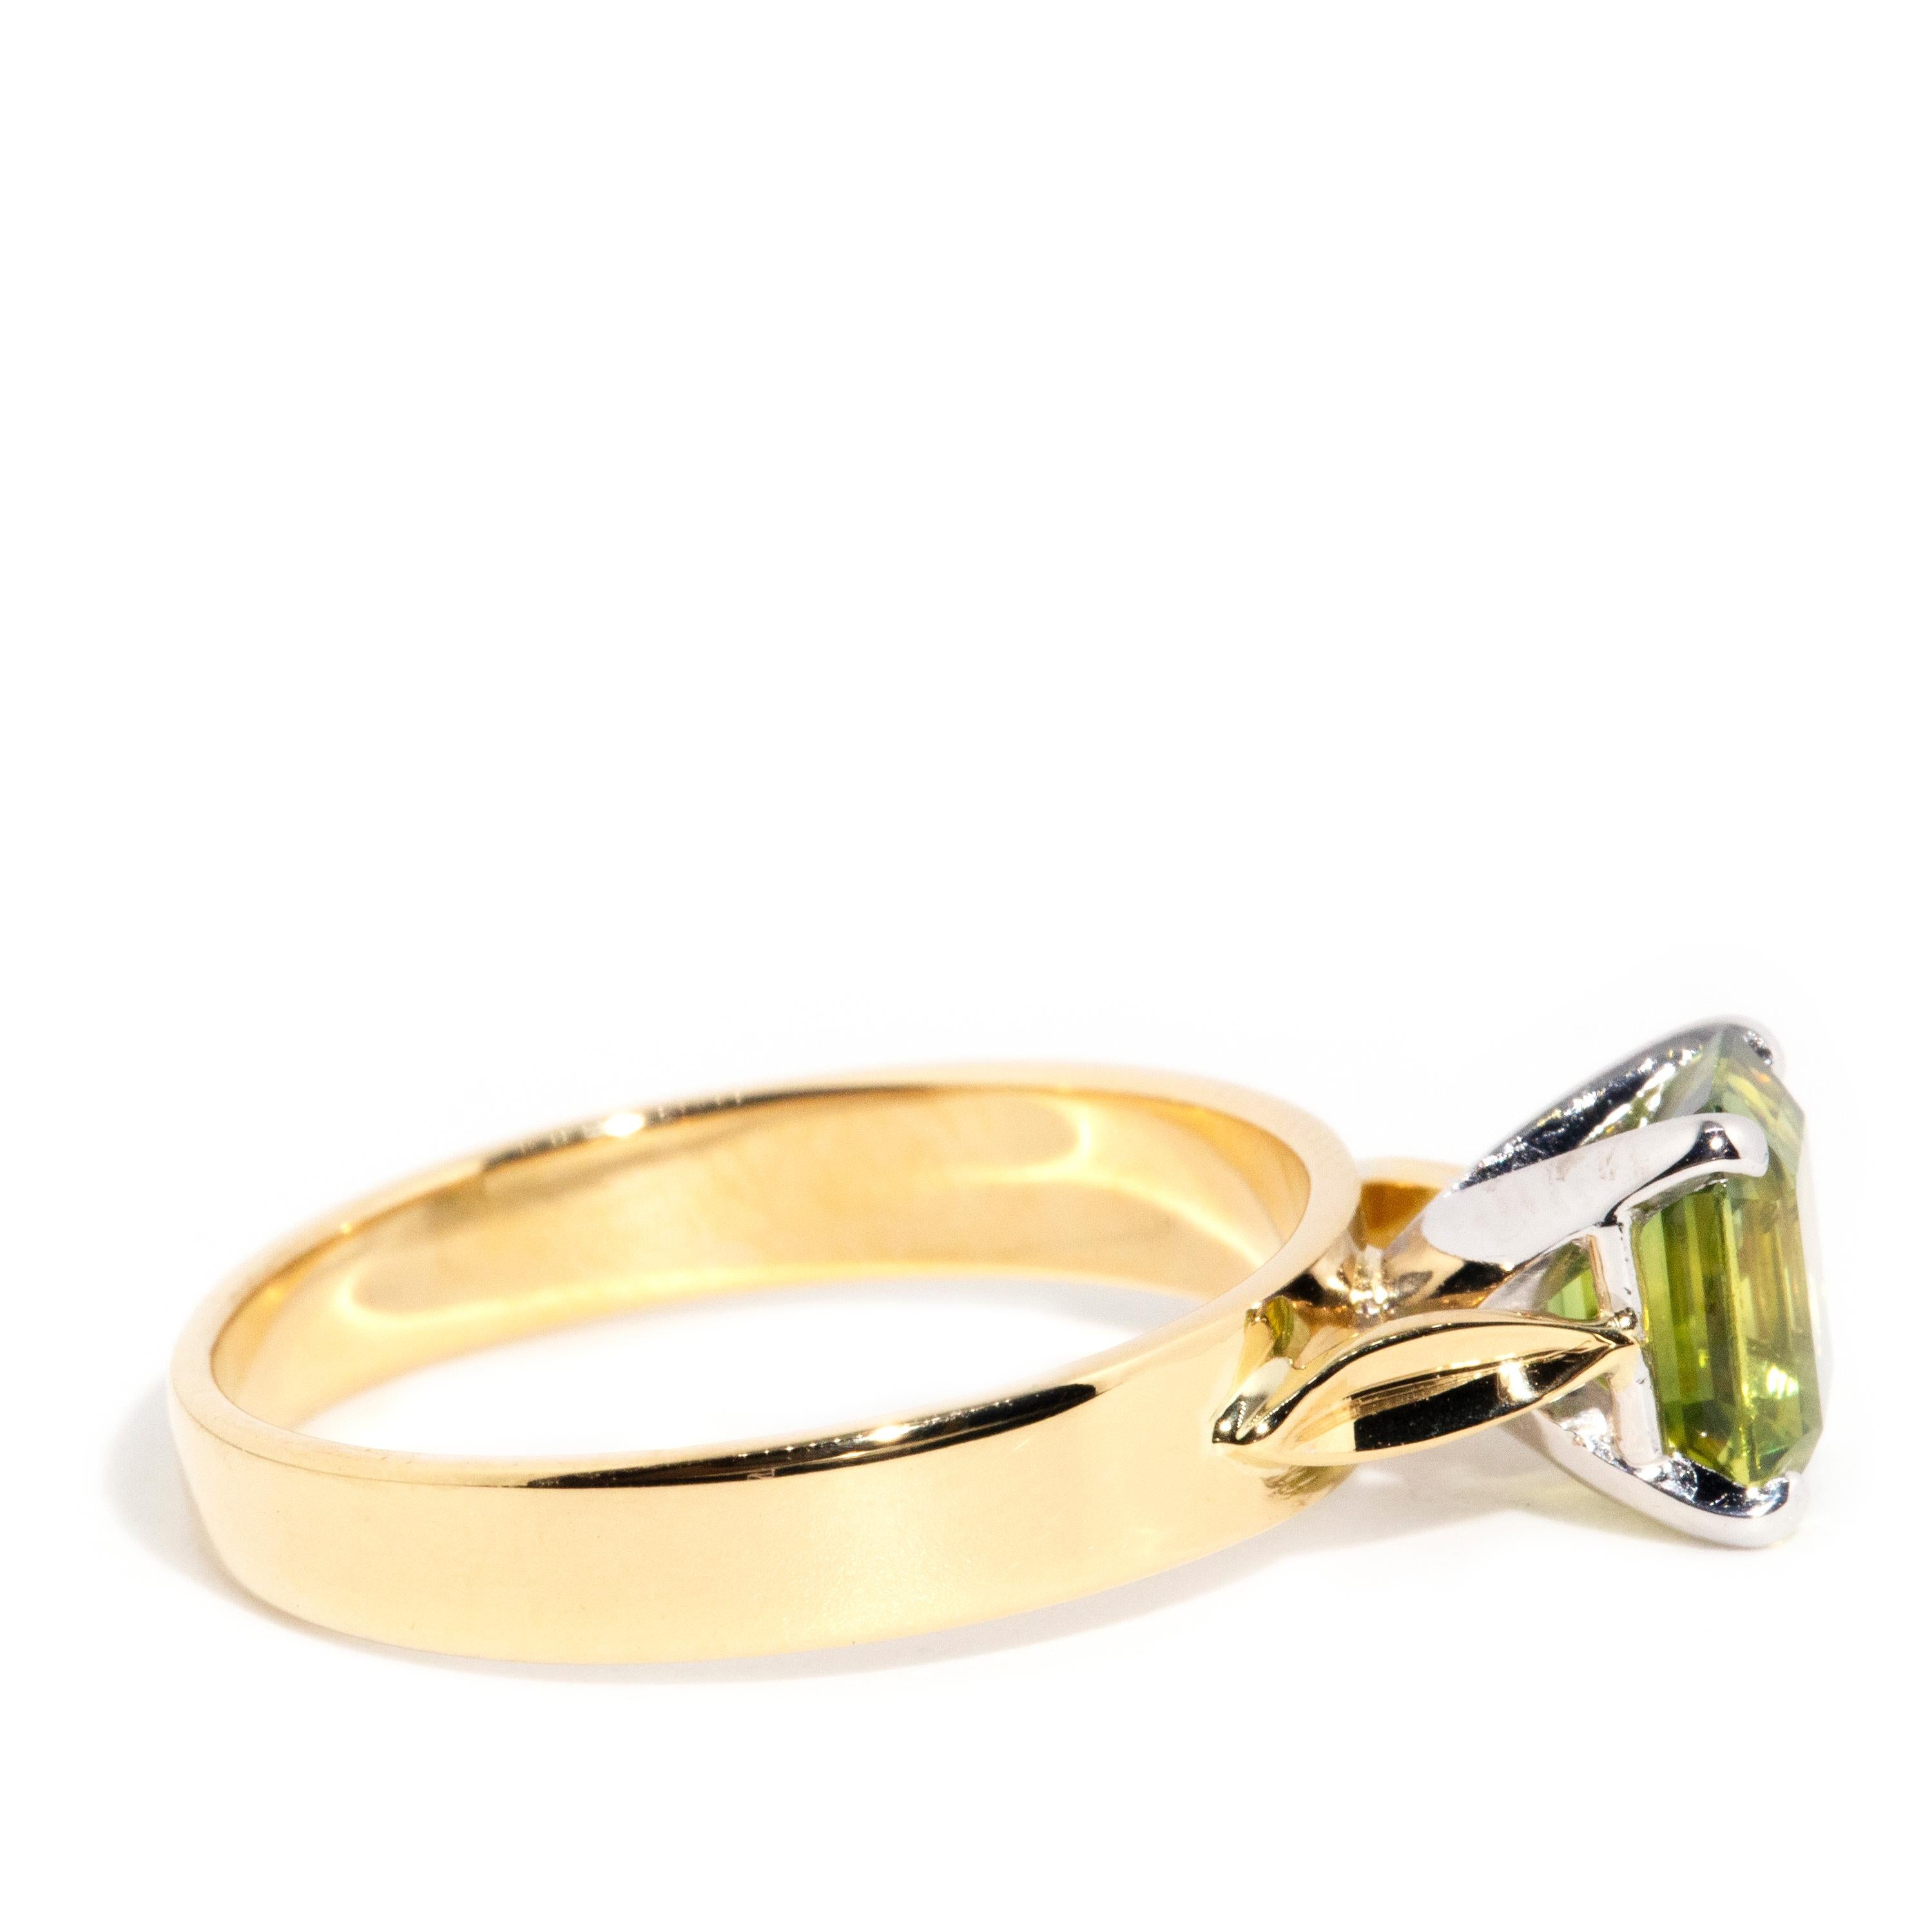 Vintage 1990s 18 Carat Yellow Gold Emerald Cut Parti Sapphire Solitaire Ring2 2